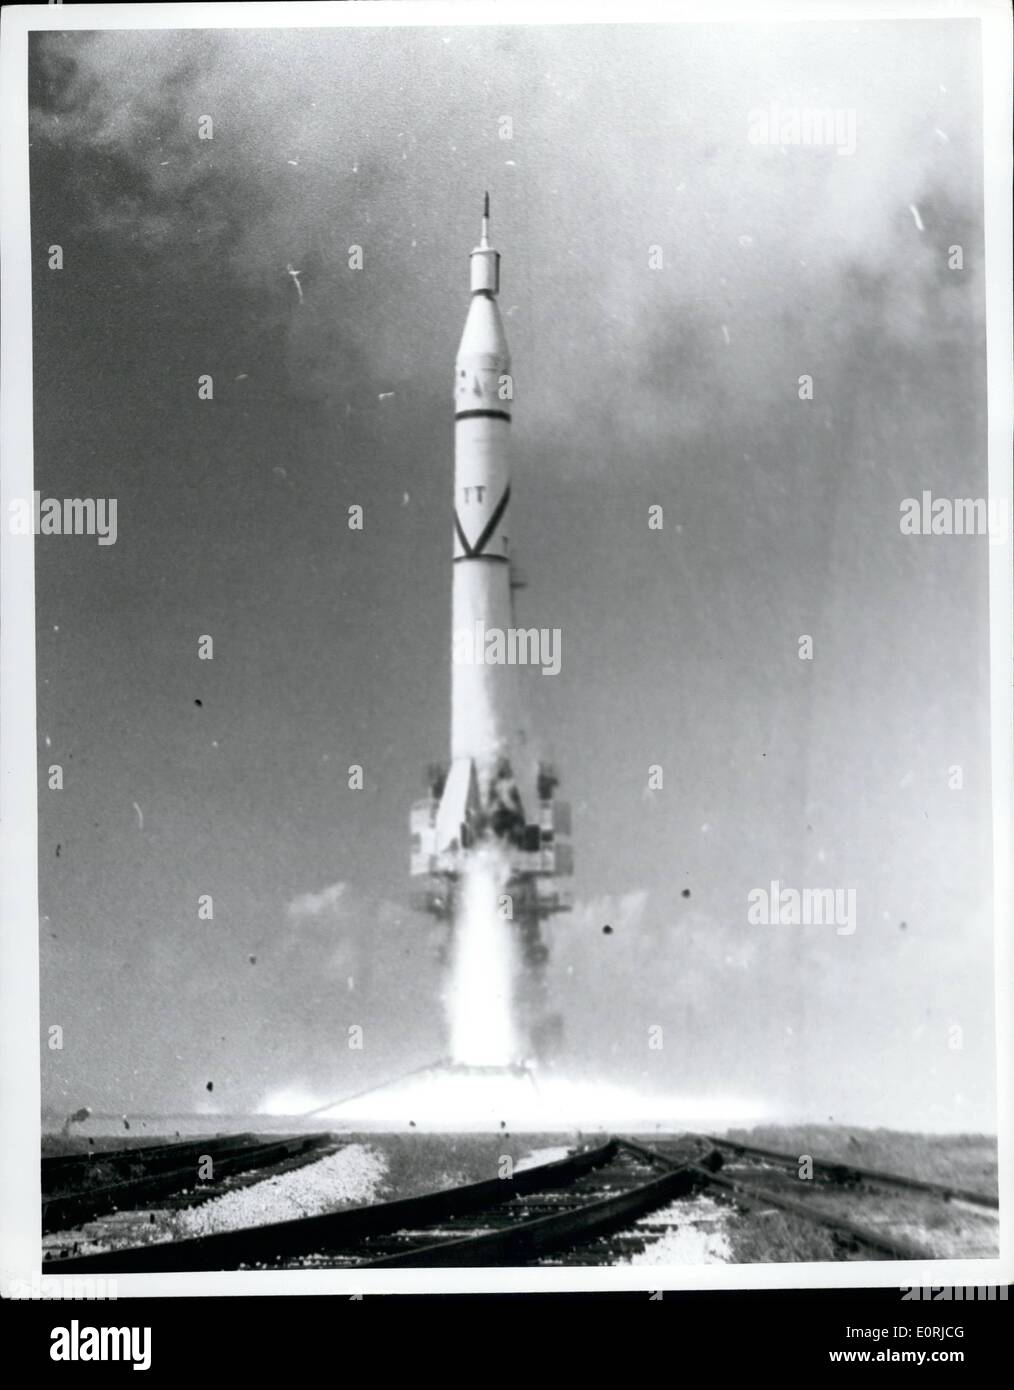 Nov. 16, 1959 - 16-11-59 First pictures of Soviet Rocket launching. Up into the outer space. The famous Laika Soviet original Ã¢â‚¬Ëœspace dog' has followers in the form of the dogs Snowdrop and Courageous (Russian Snethinka and Otvazhnaya ) and a number of nameless rats and mice. This picture taken from a new Soviet Documentary film shows the launching of the Soviet Rocket. A stream of fire and smoke bursts forth from the rocket's nozzle and a Deafening roar of the motor. Puffs of smoke hides the rockets lower part and the rocket rises slowly from the earth. Stock Photo